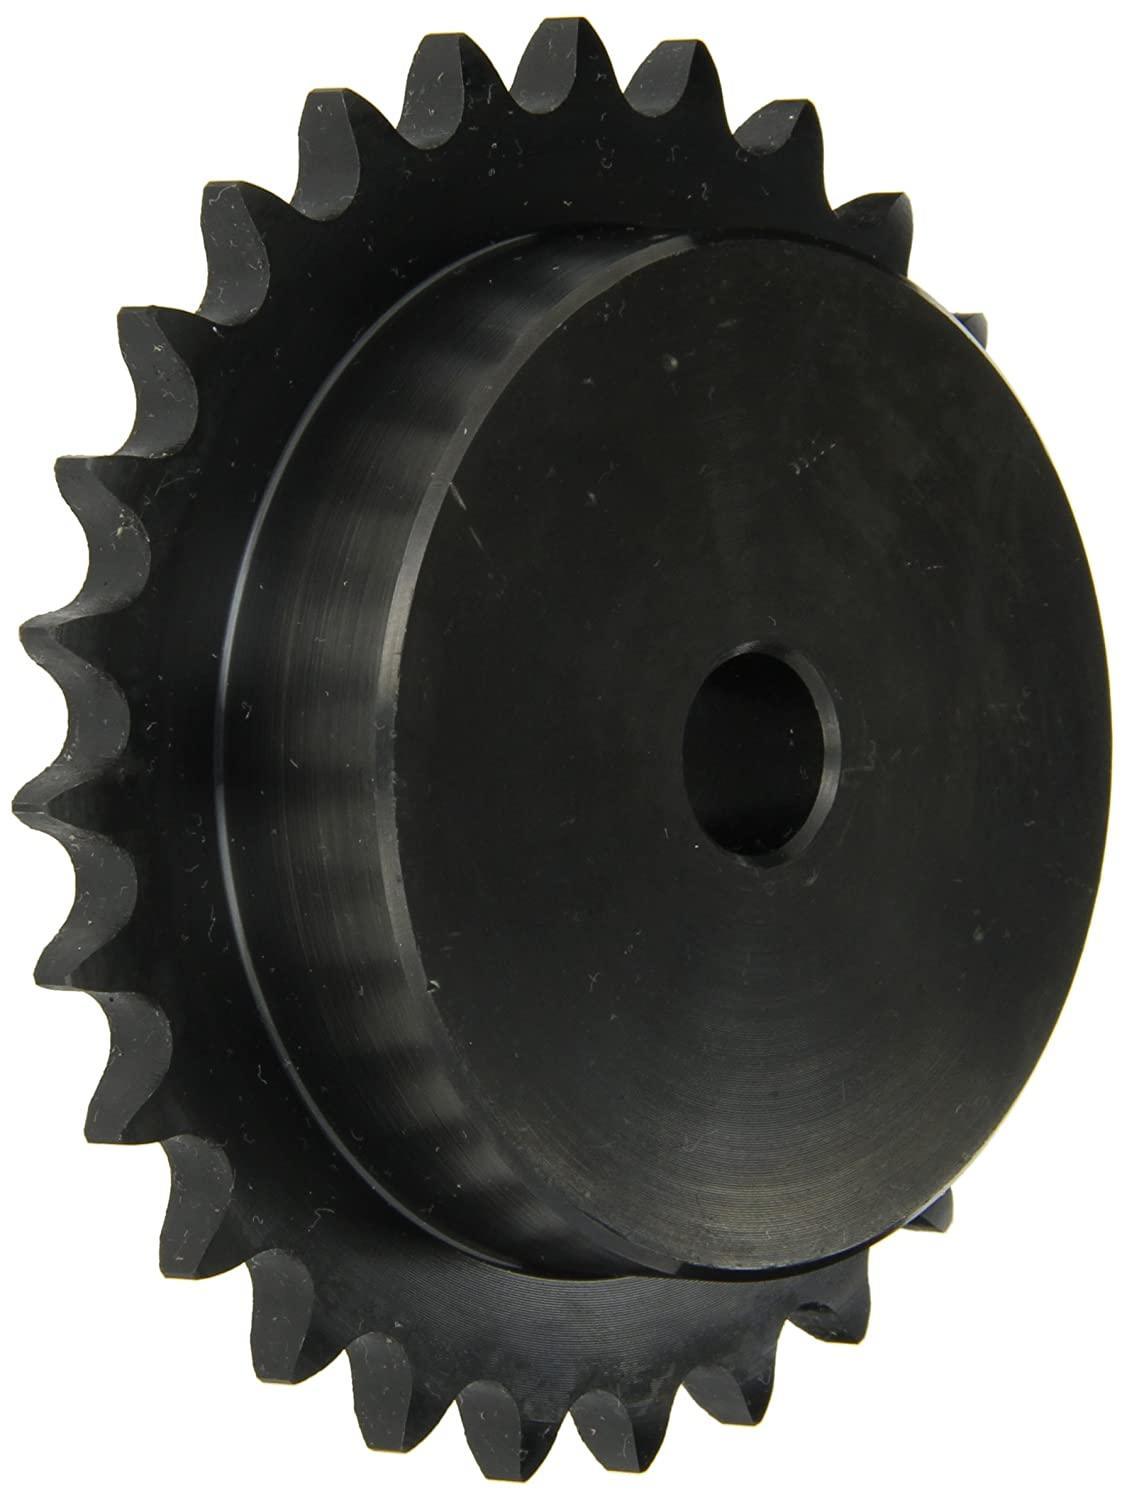 25B24 Roller Chain Sprocket With Stock Bore - Forces Inc